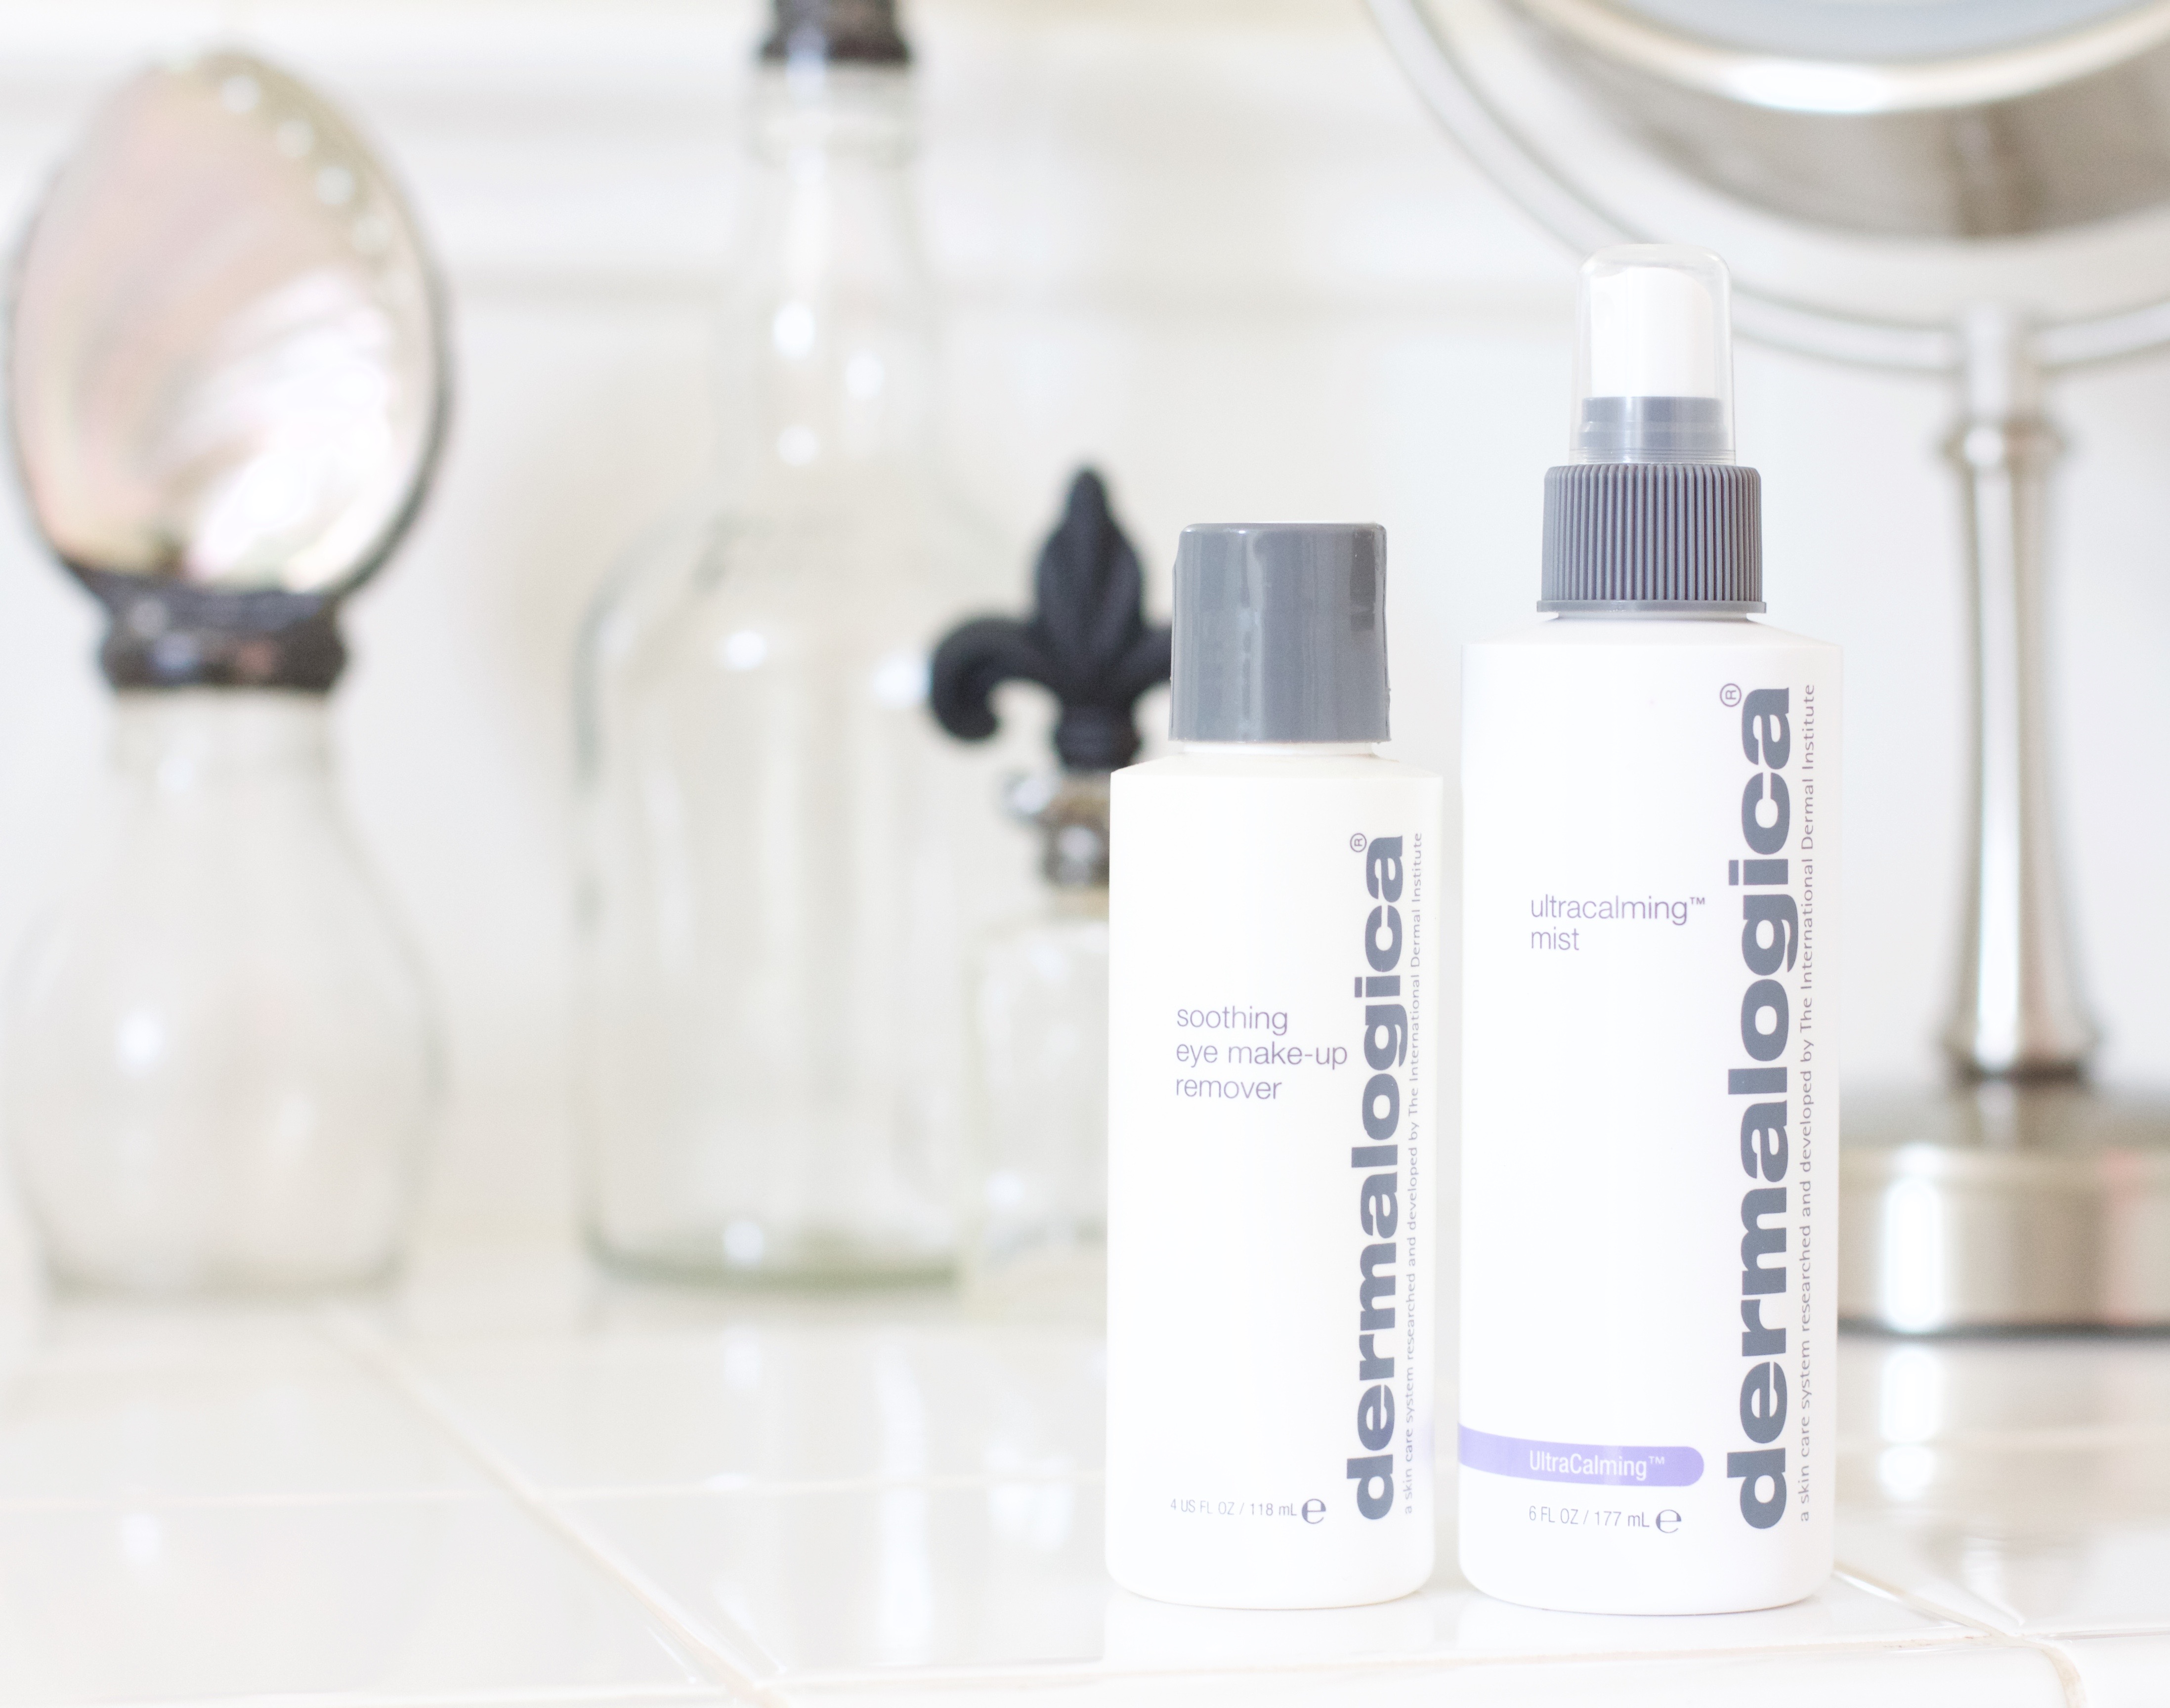 Best dermalogica products